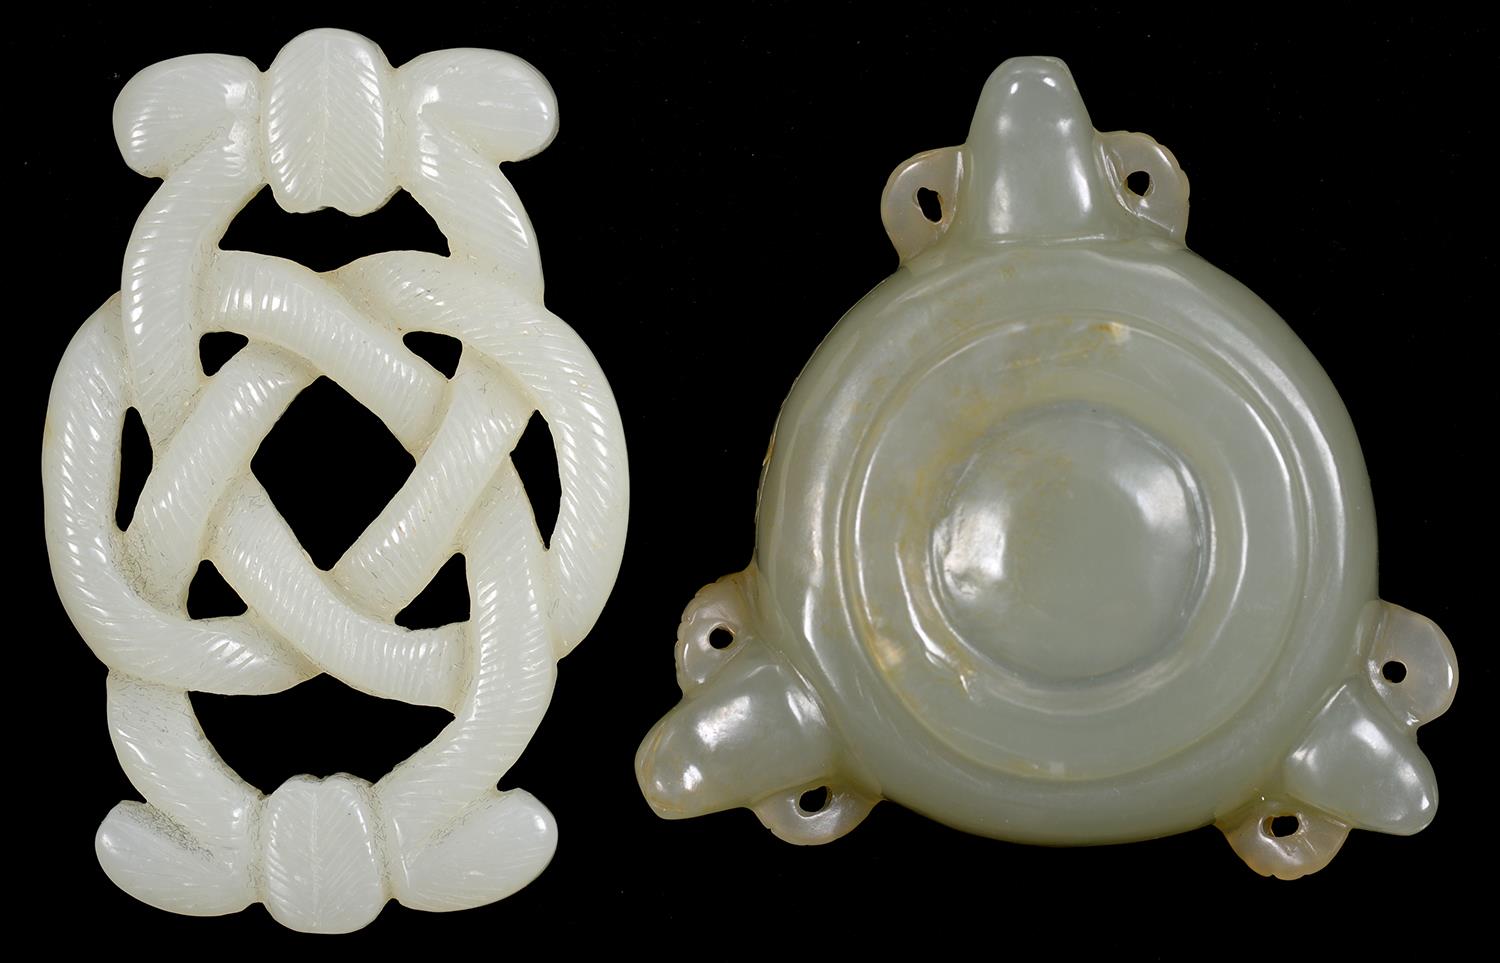 A CHINESE JADE CARVING OF A KNOT AND A SIMILAR MINIATURE BOWL WITH THREE PIERCED LUG HANDLES, KNOT